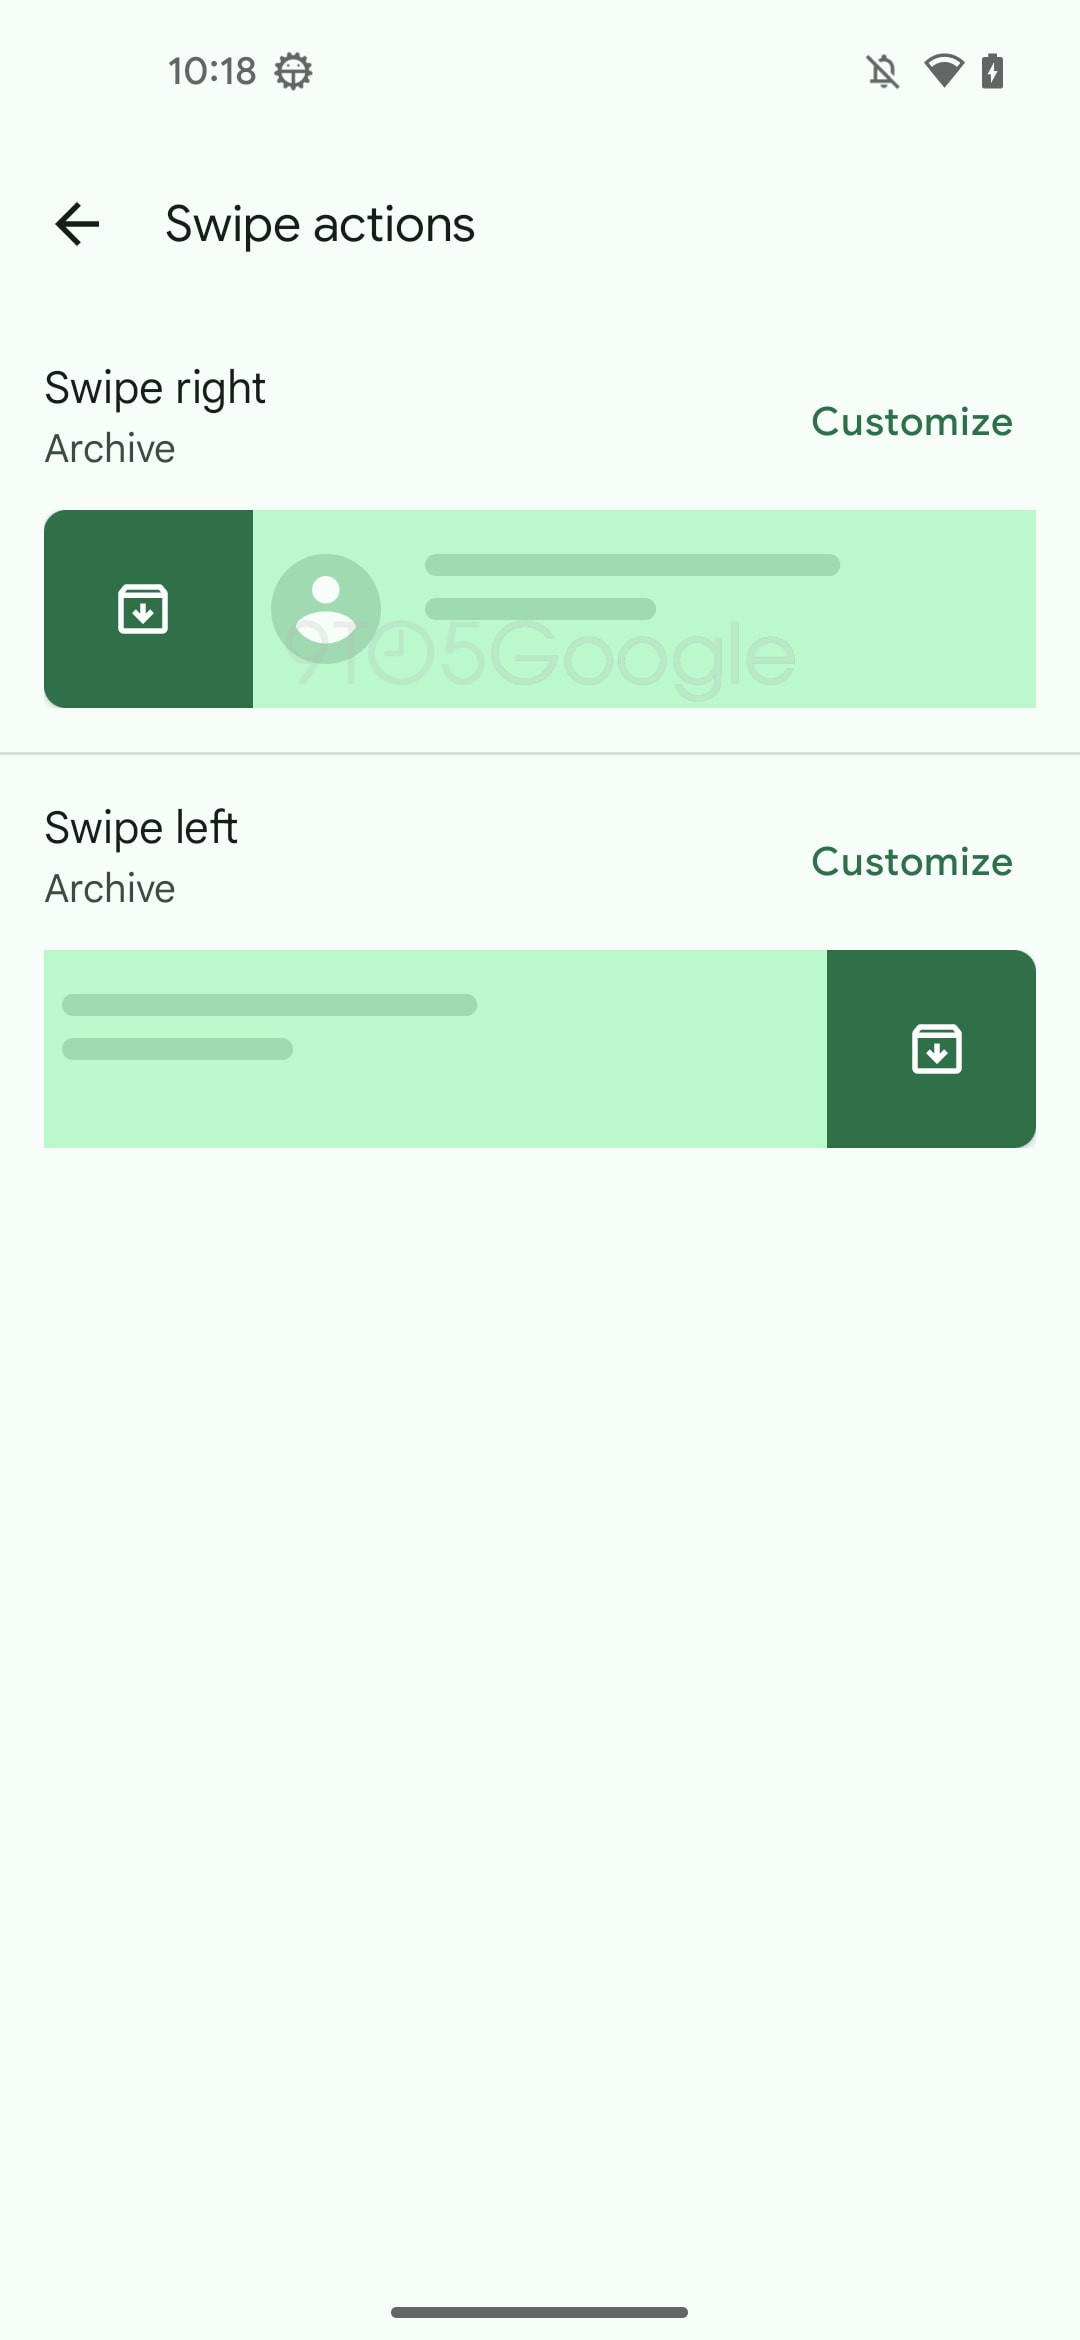 Google Messages menu for customizing "Swipe Actions"